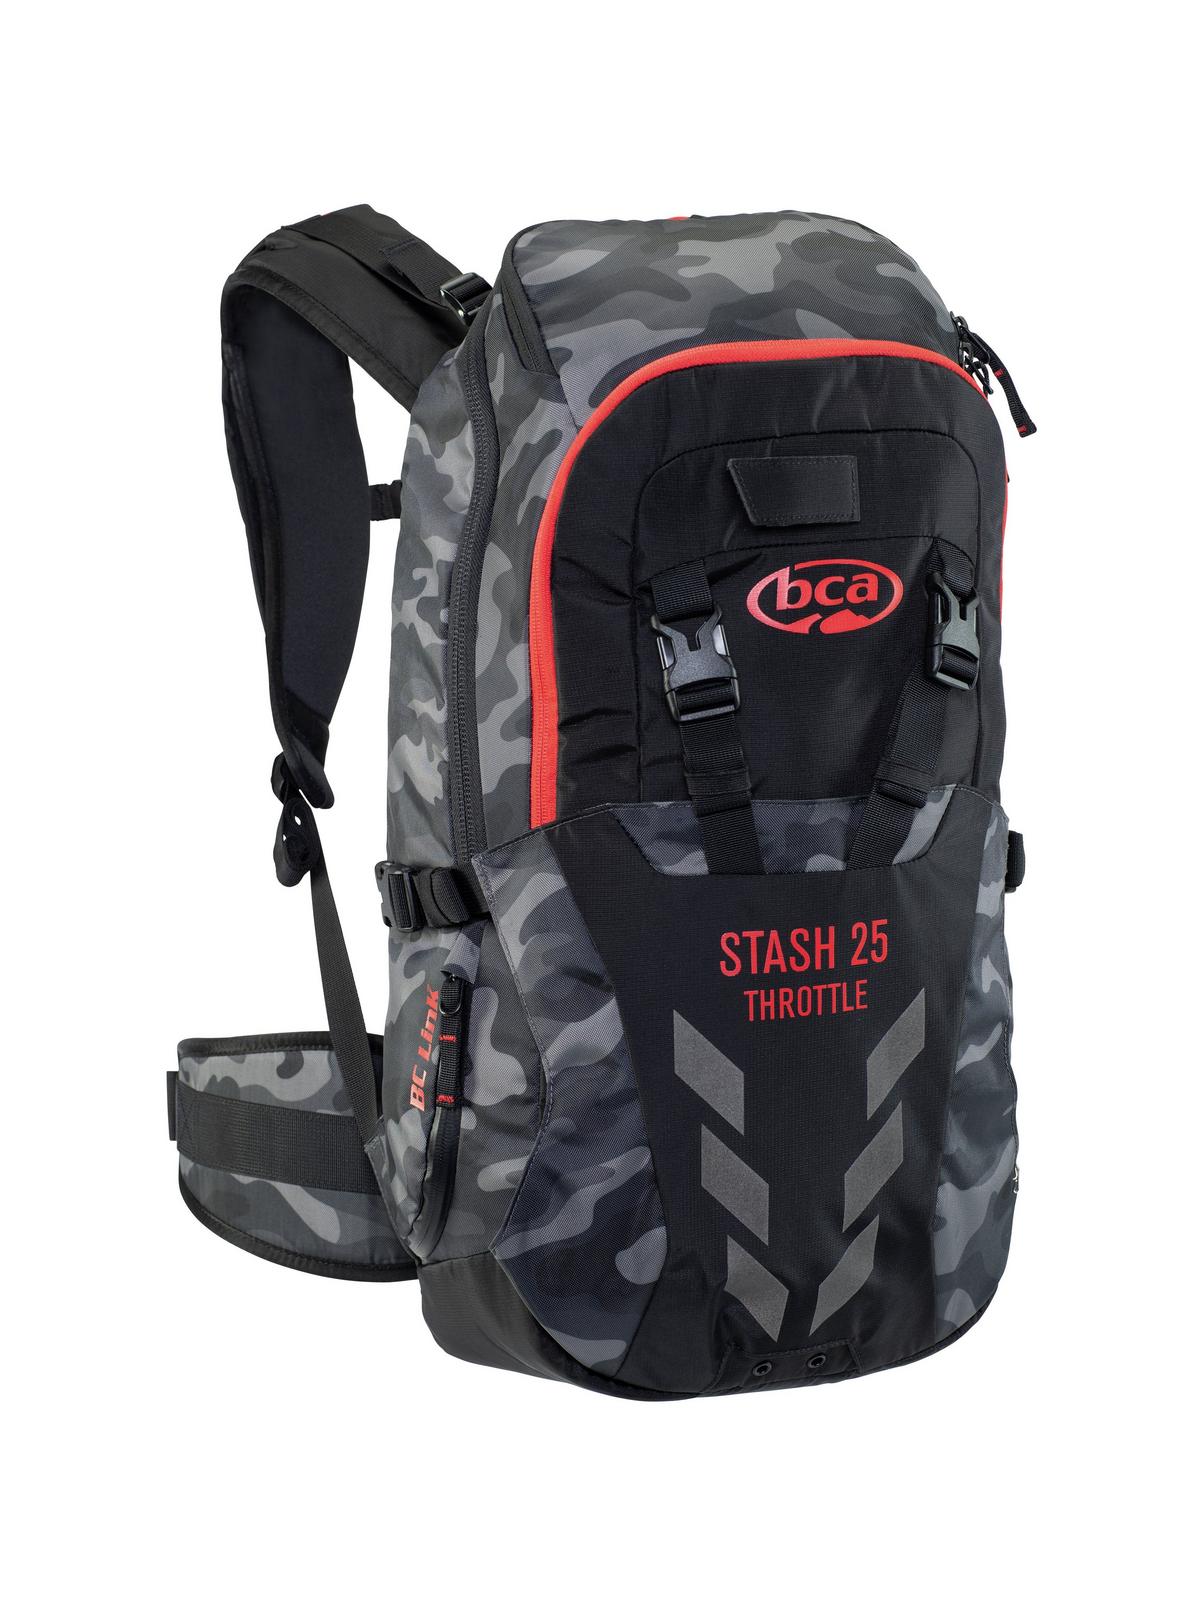 BCA Stash™ 25L Throttle Backpack | Backcountry Access